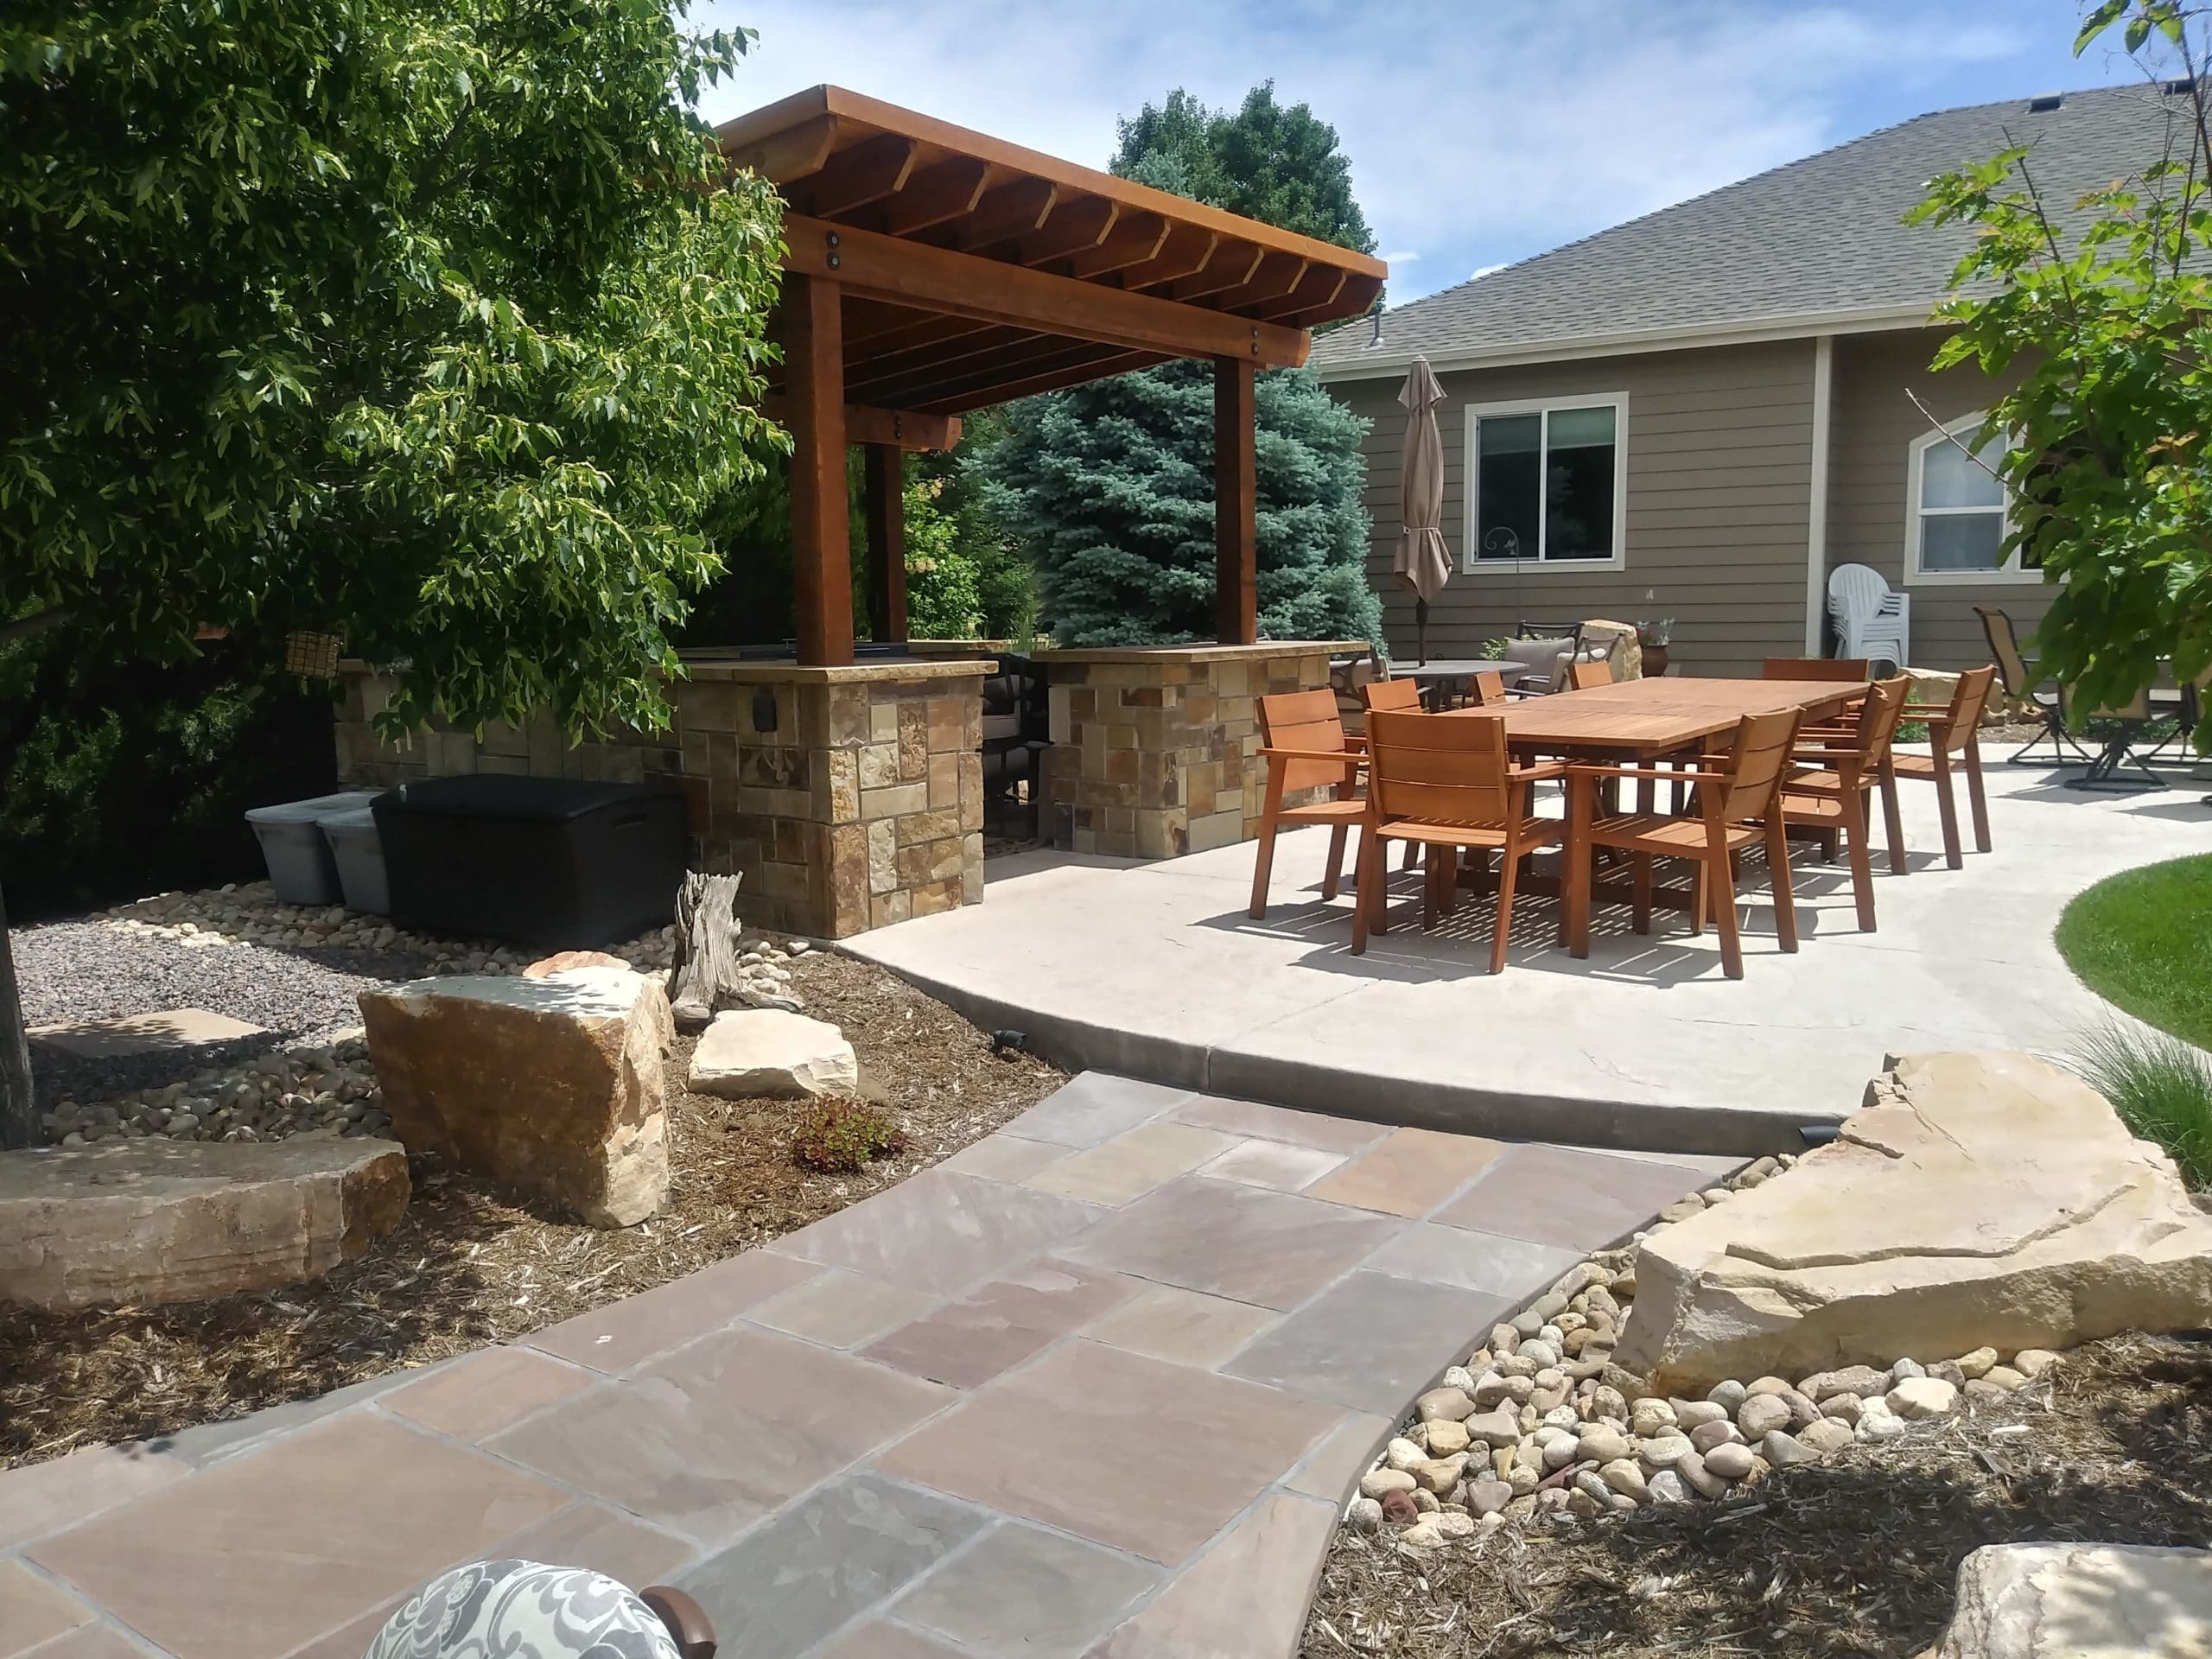 Outdoor Kitchen with patio and outdoor seating and eating area.